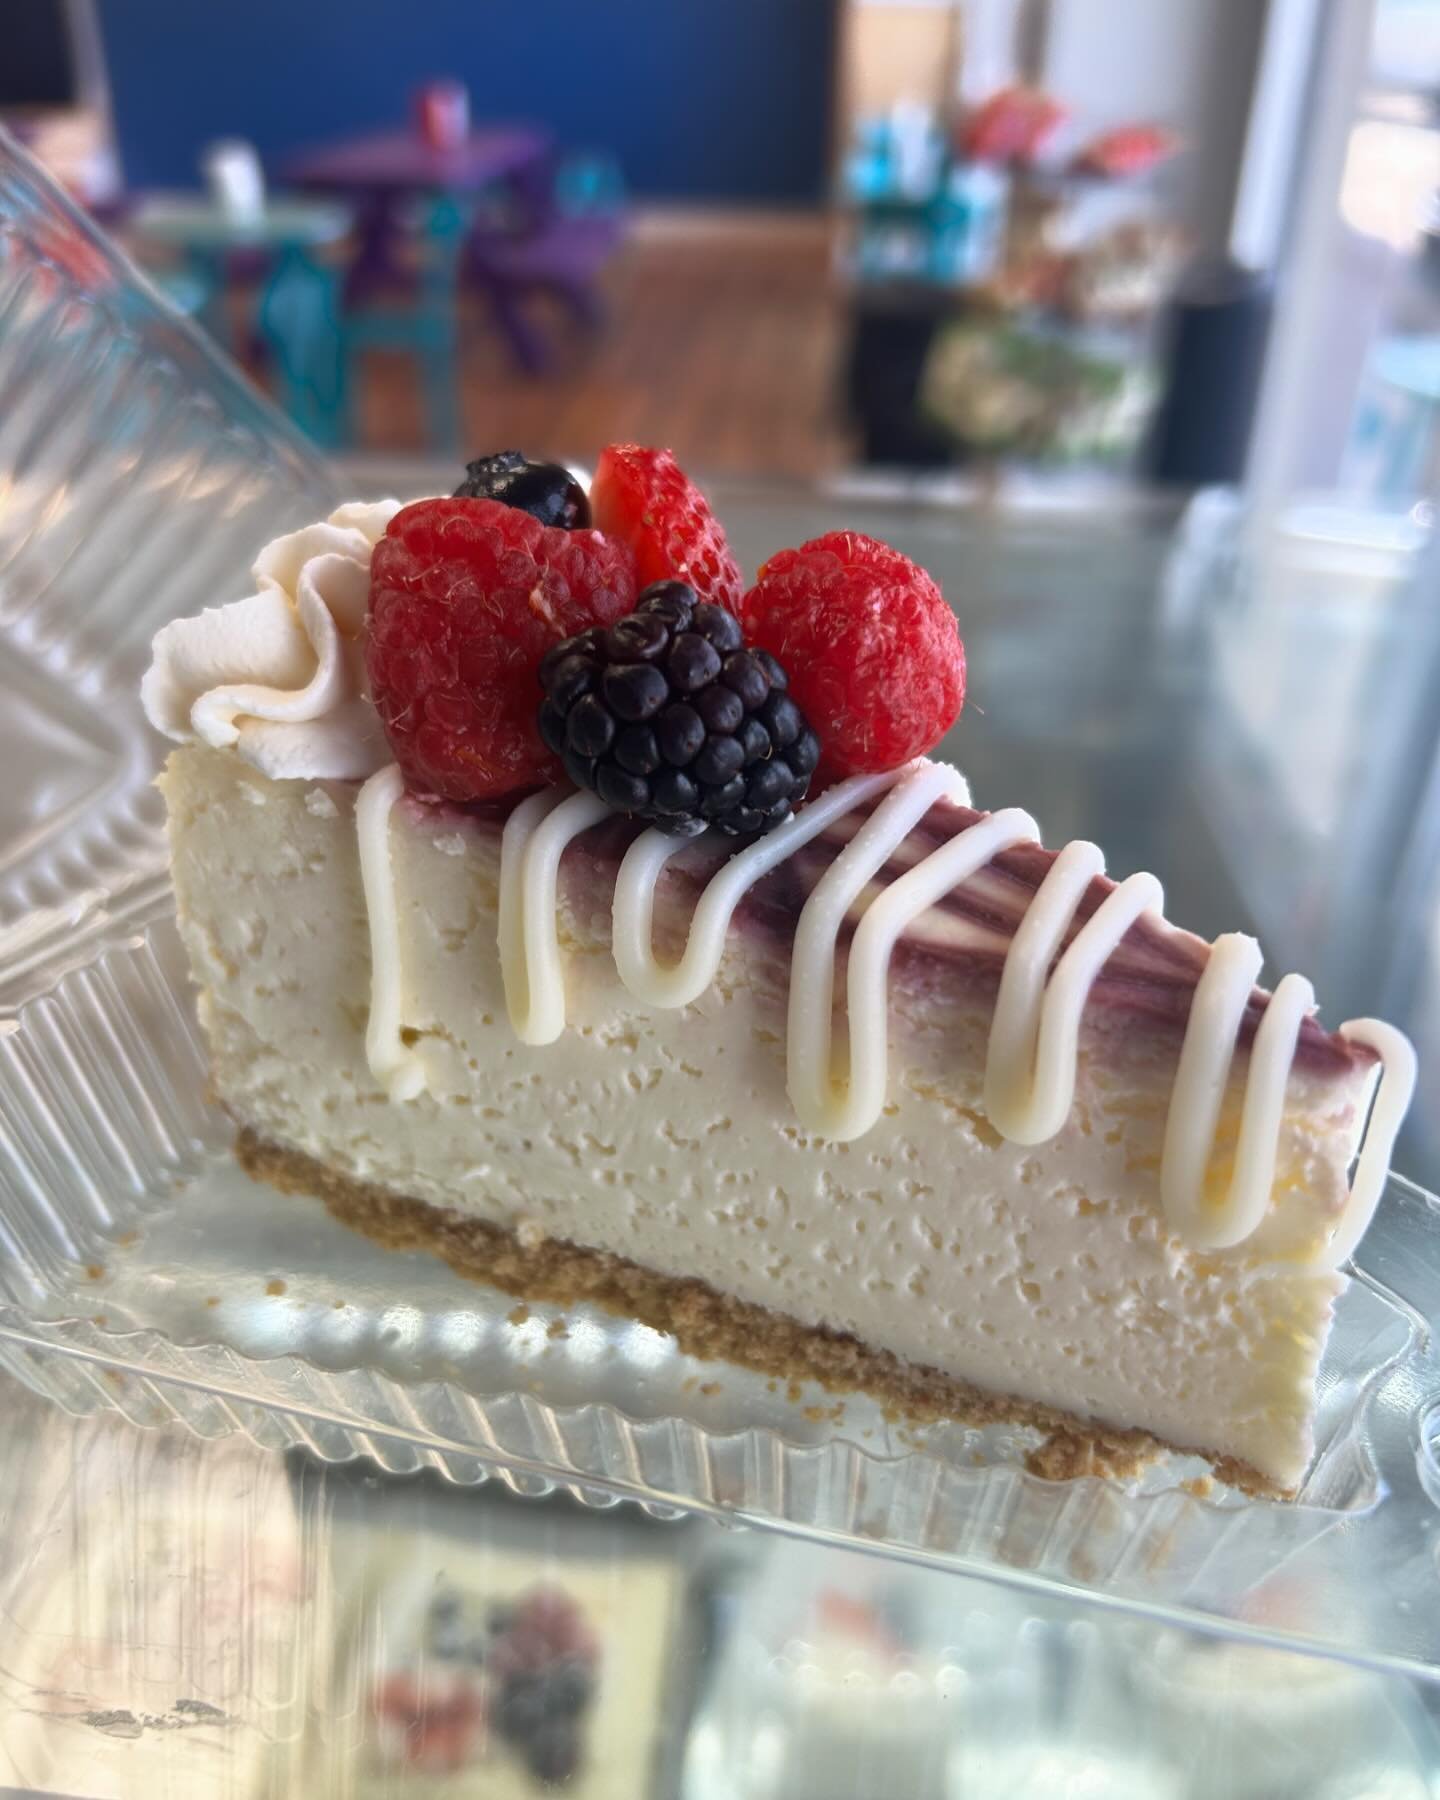 Mixed berry white chocolate cheesecake ! 😳😋😋

Then gluten free raspberry white chocolate cheesecake cupcakes OH MY !!

So many yummy flavors available today ! 
#desserts #dessertscedarcity #cedarcityutah #cedarcityfood